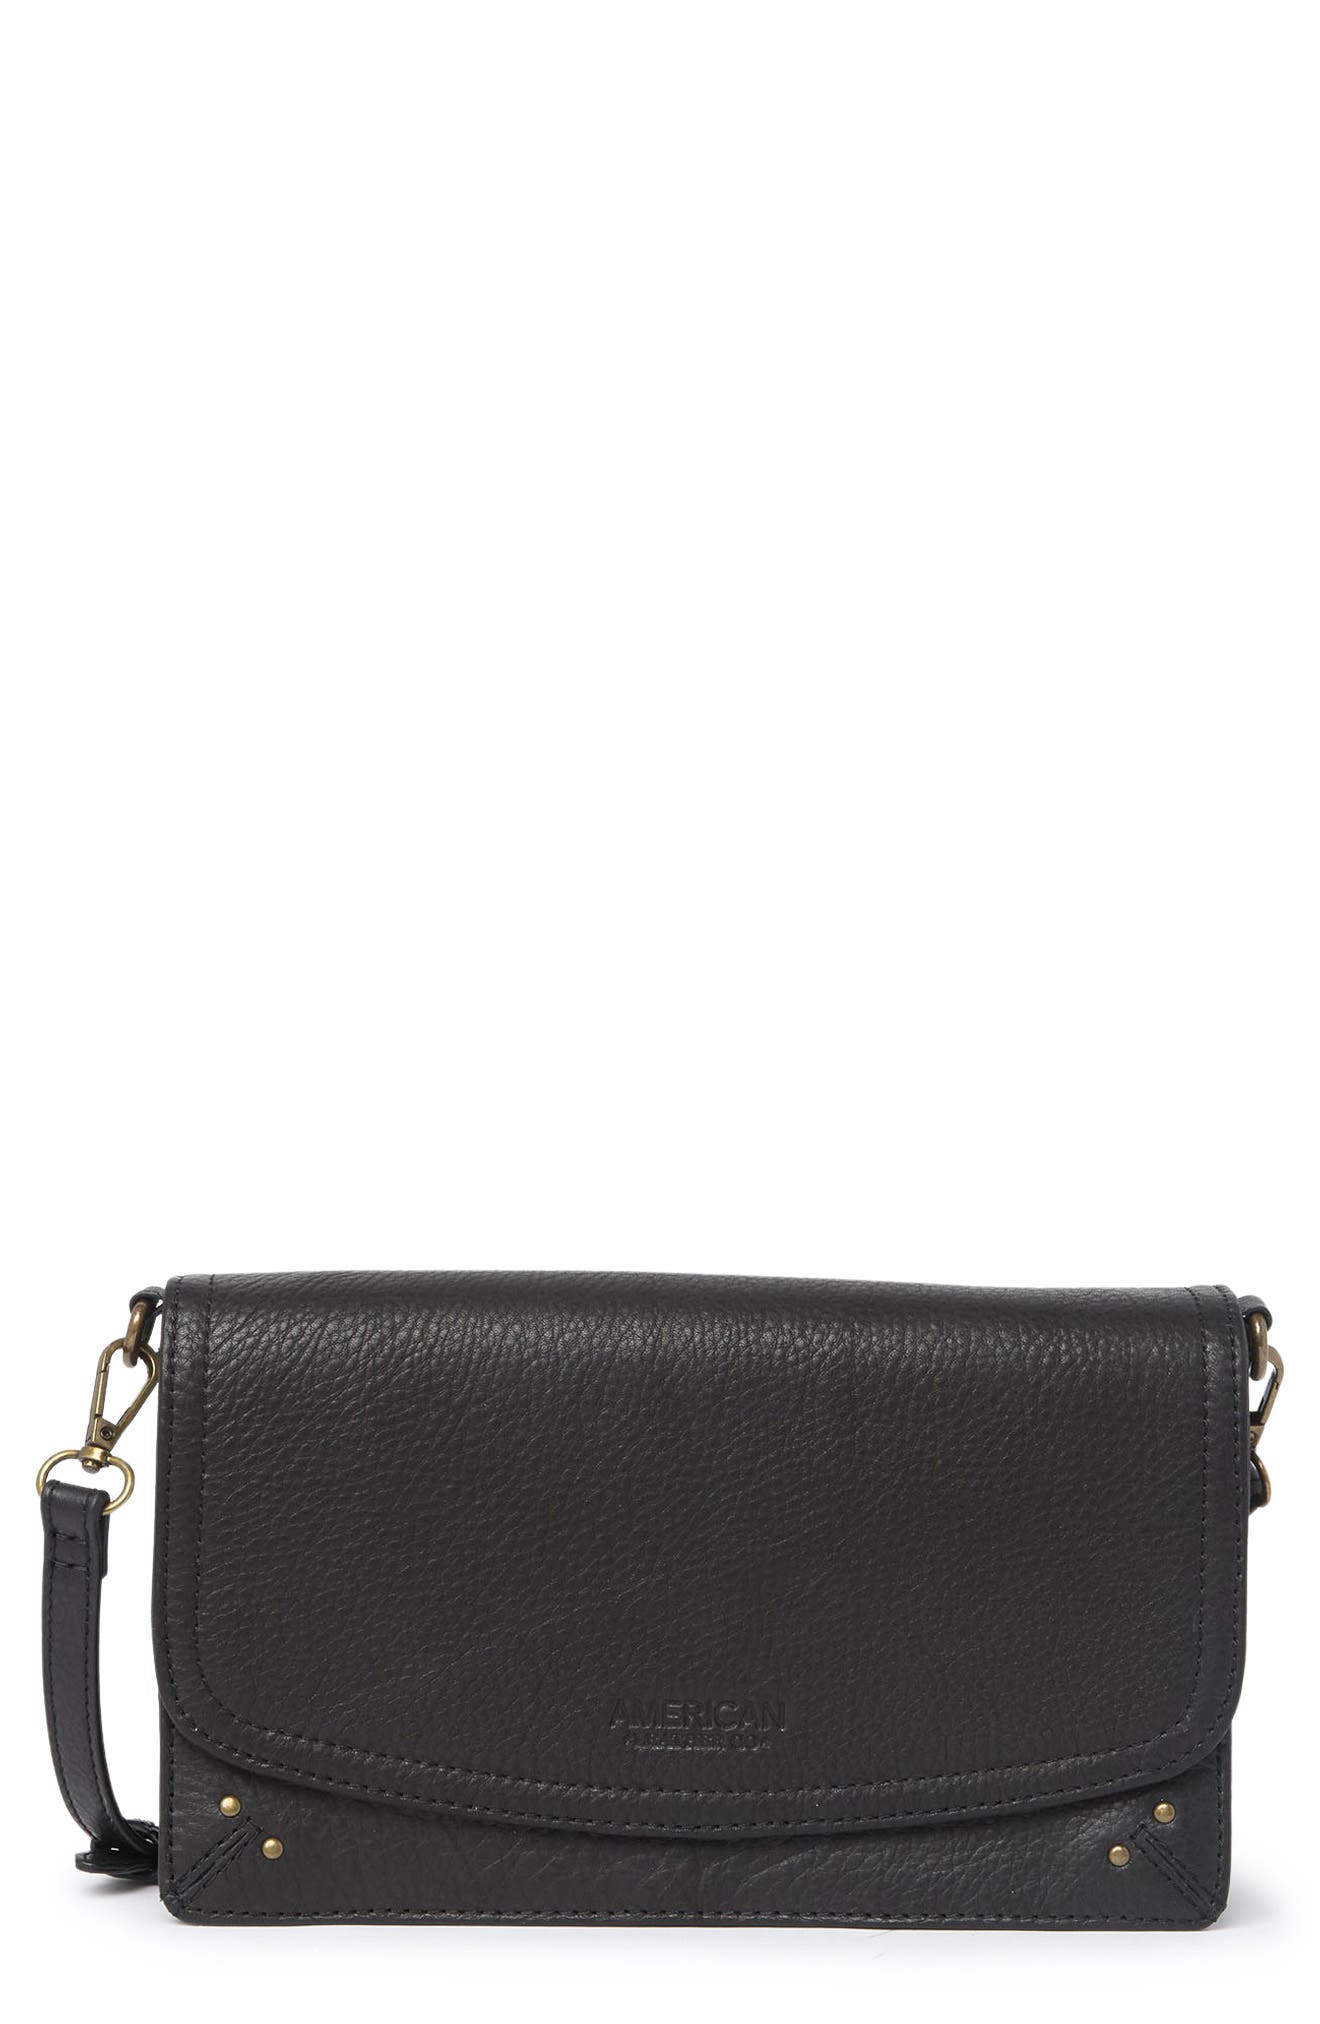 American Leather Co. Brenton Leather Crossbody Bag In Black Smooth